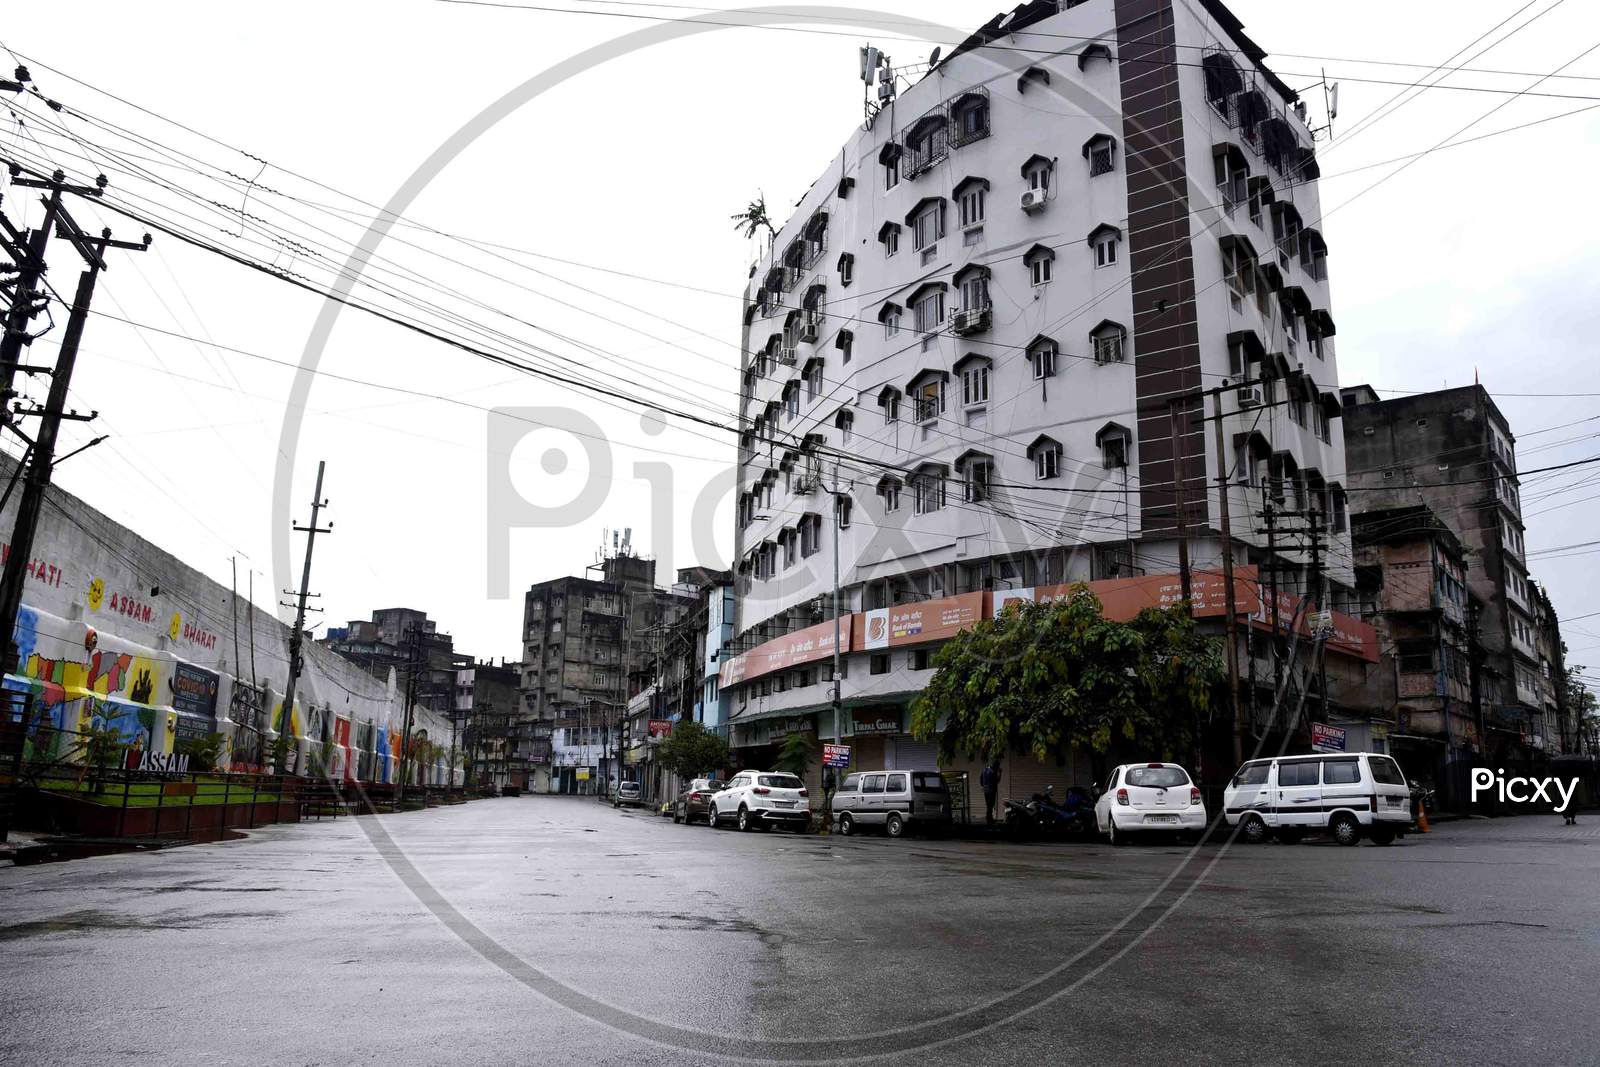 A view of Fancy Bazar deserted look